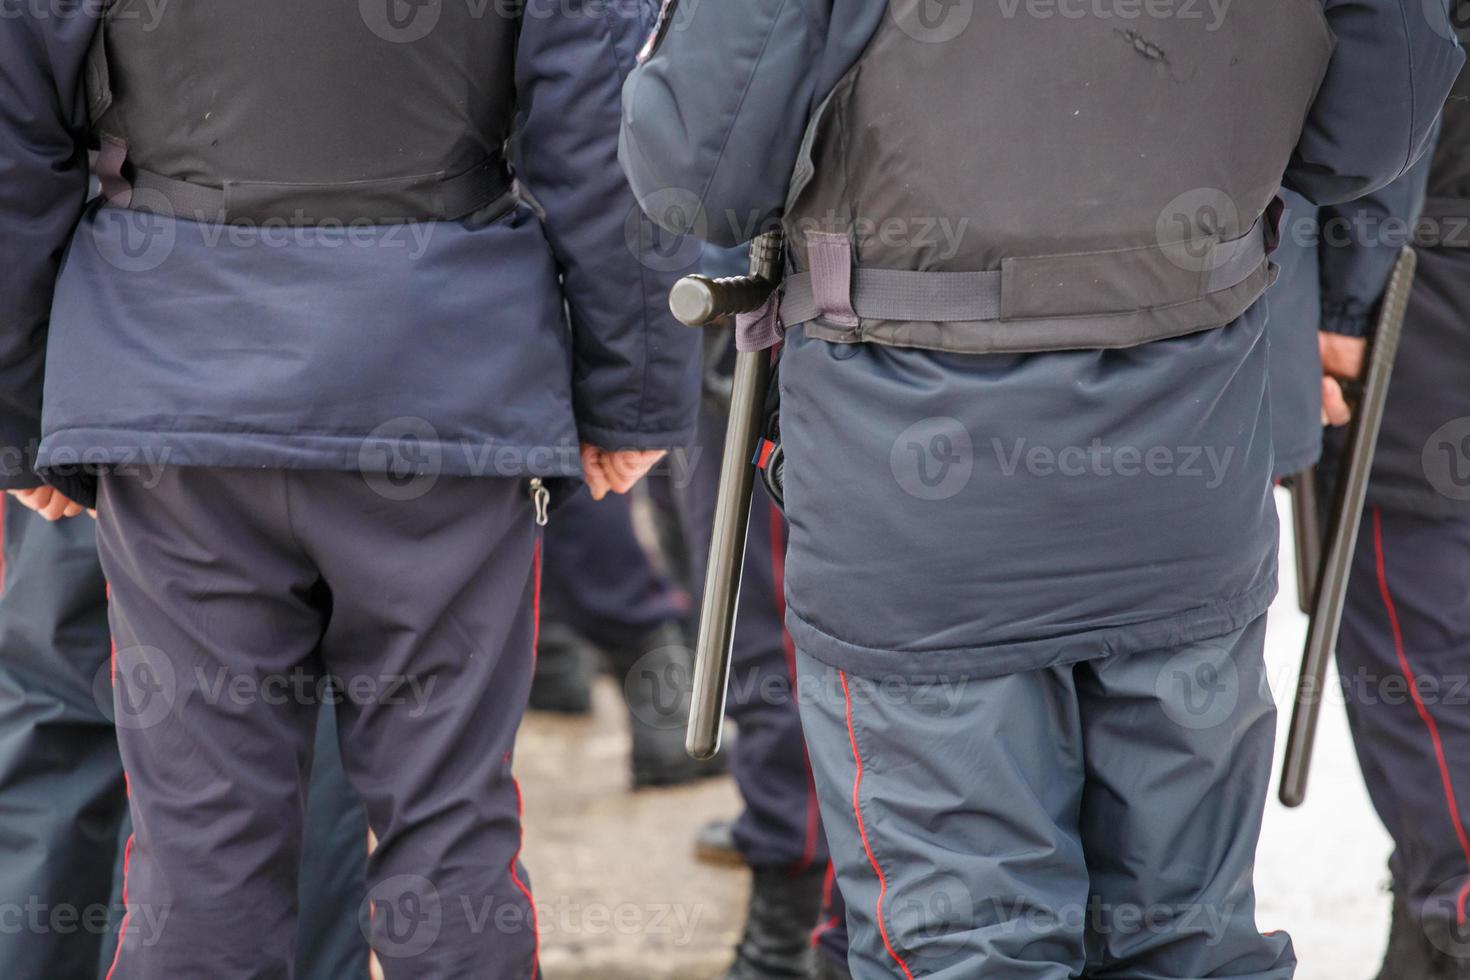 russian police officer with black rubber tonfa baton hanging on his belt photo